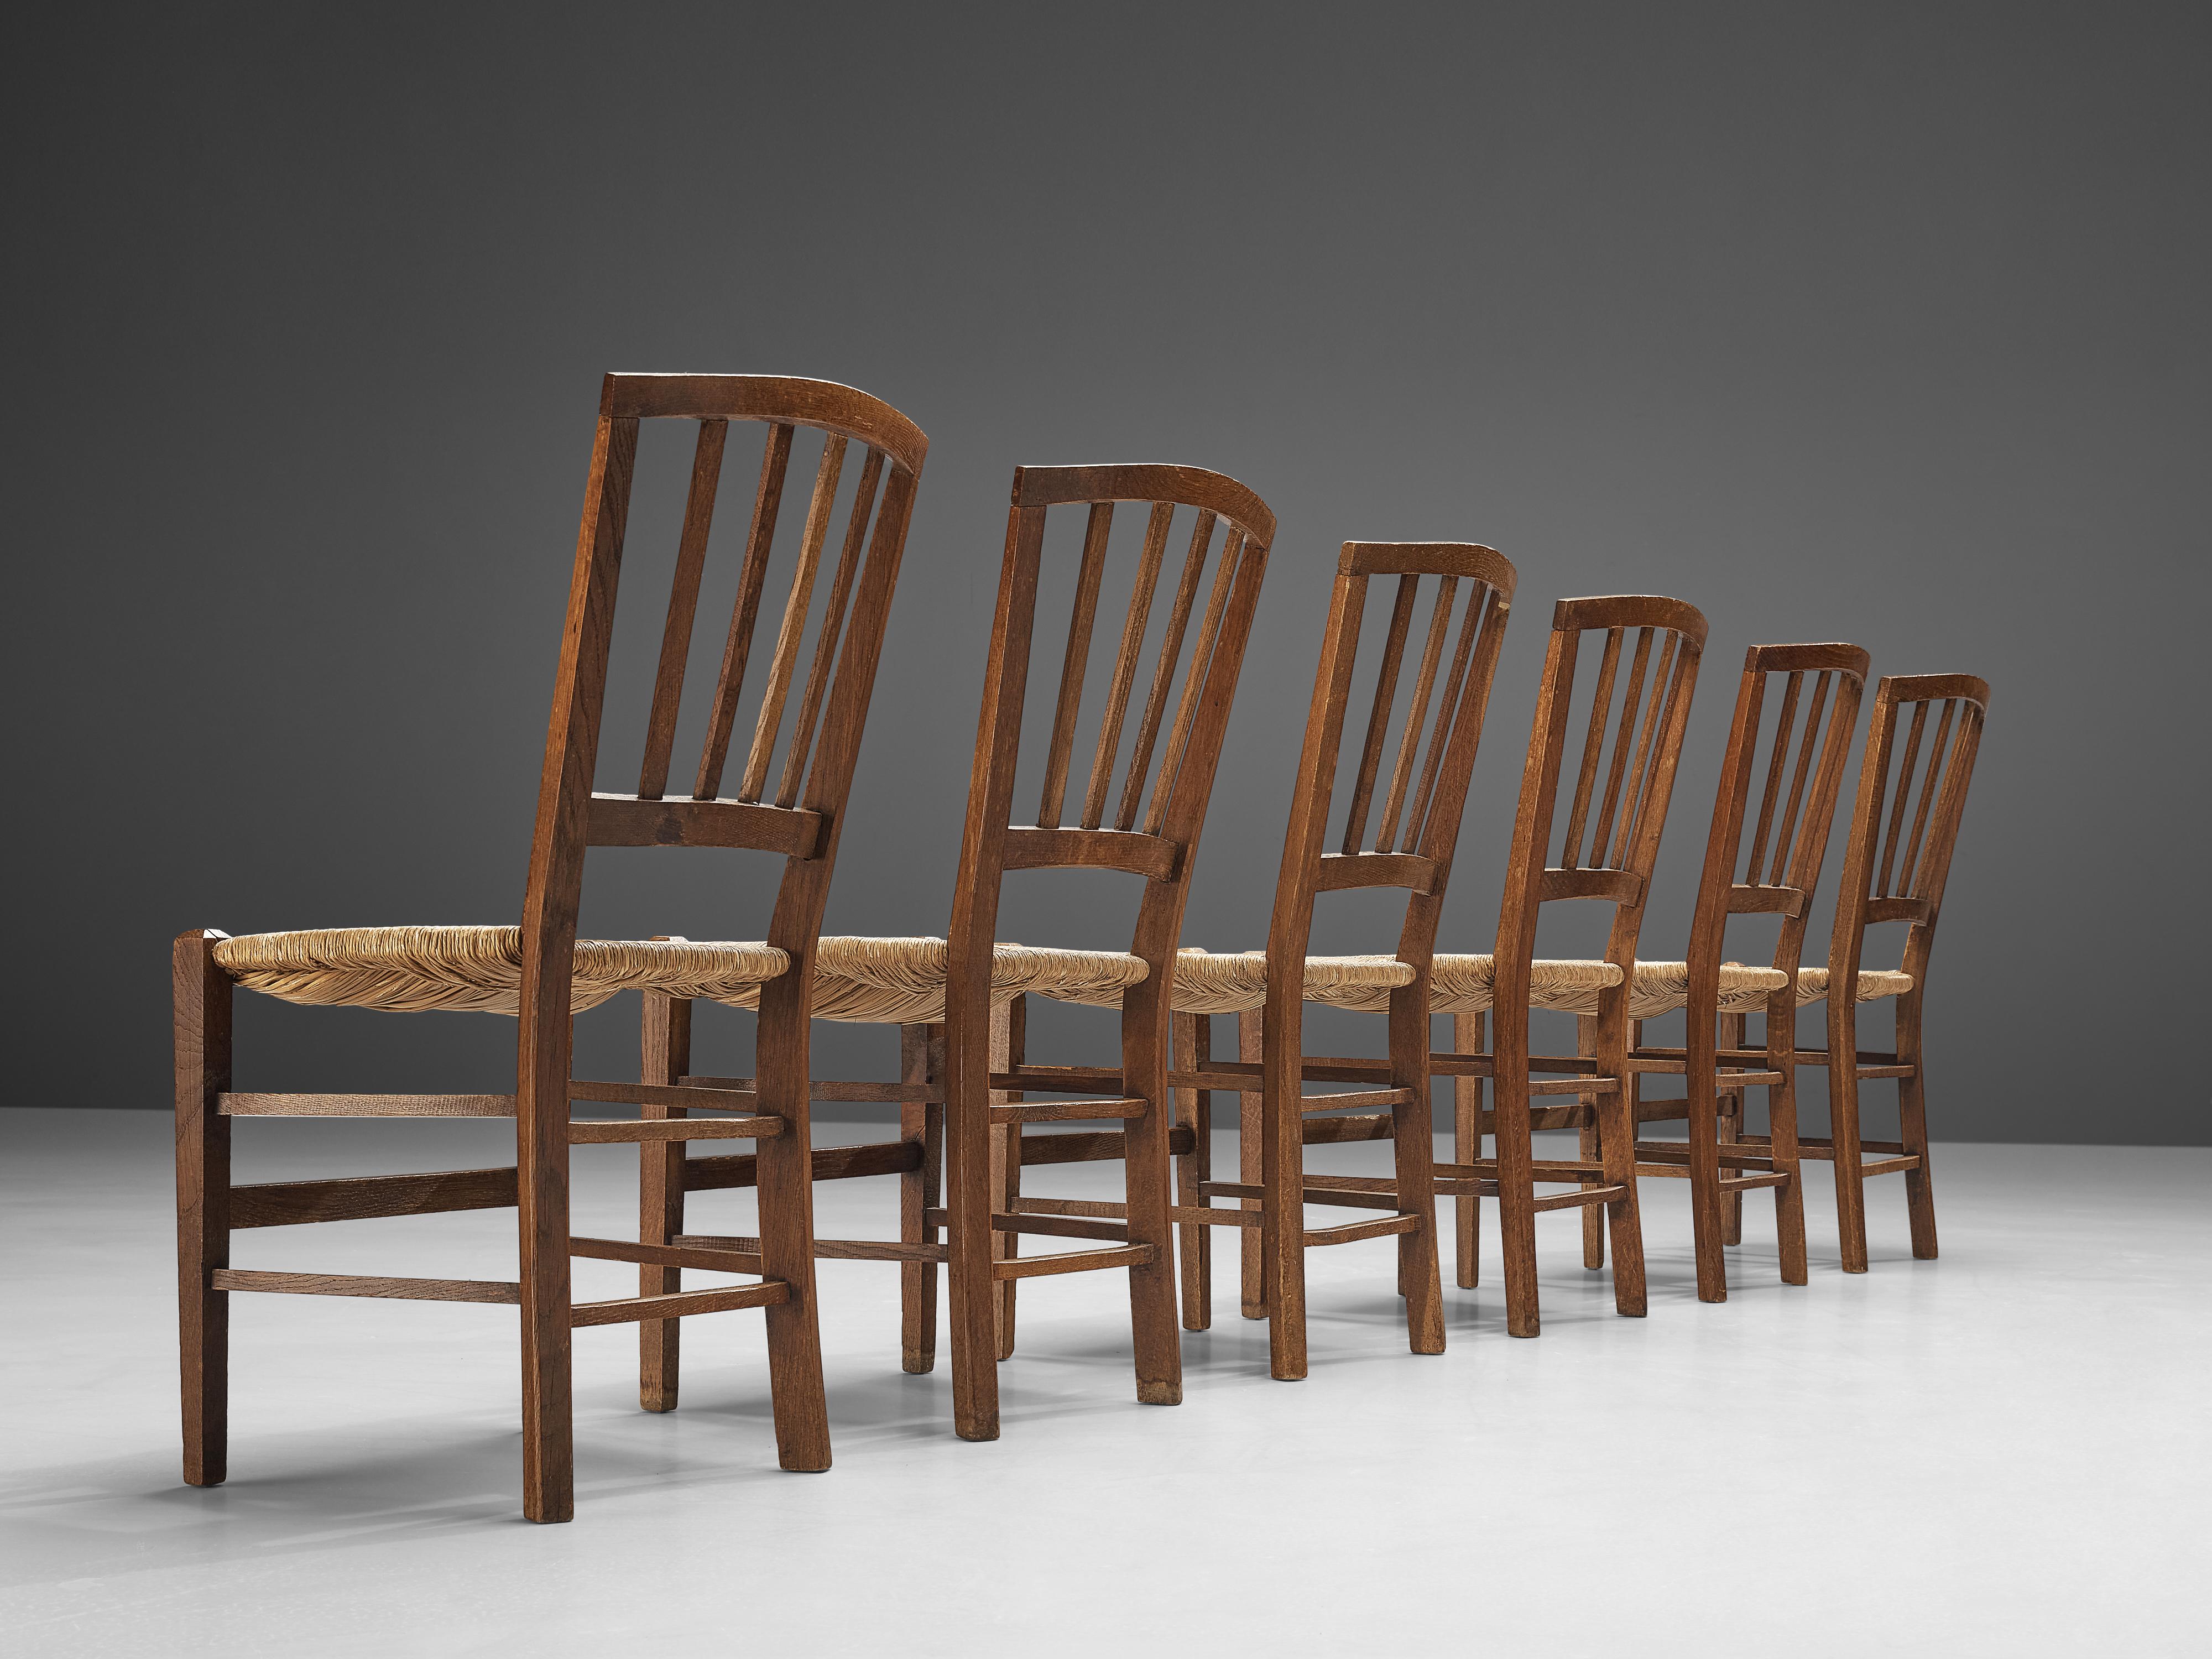 Dining chairs, oak, paper cord, The Netherlands, 1960s

Set of Dutch dining chairs in oak and paper cord, made in the 1960s. These dining chairs feature a geometric backrest that slightly curves to provide comfort for the user. Vertical slats